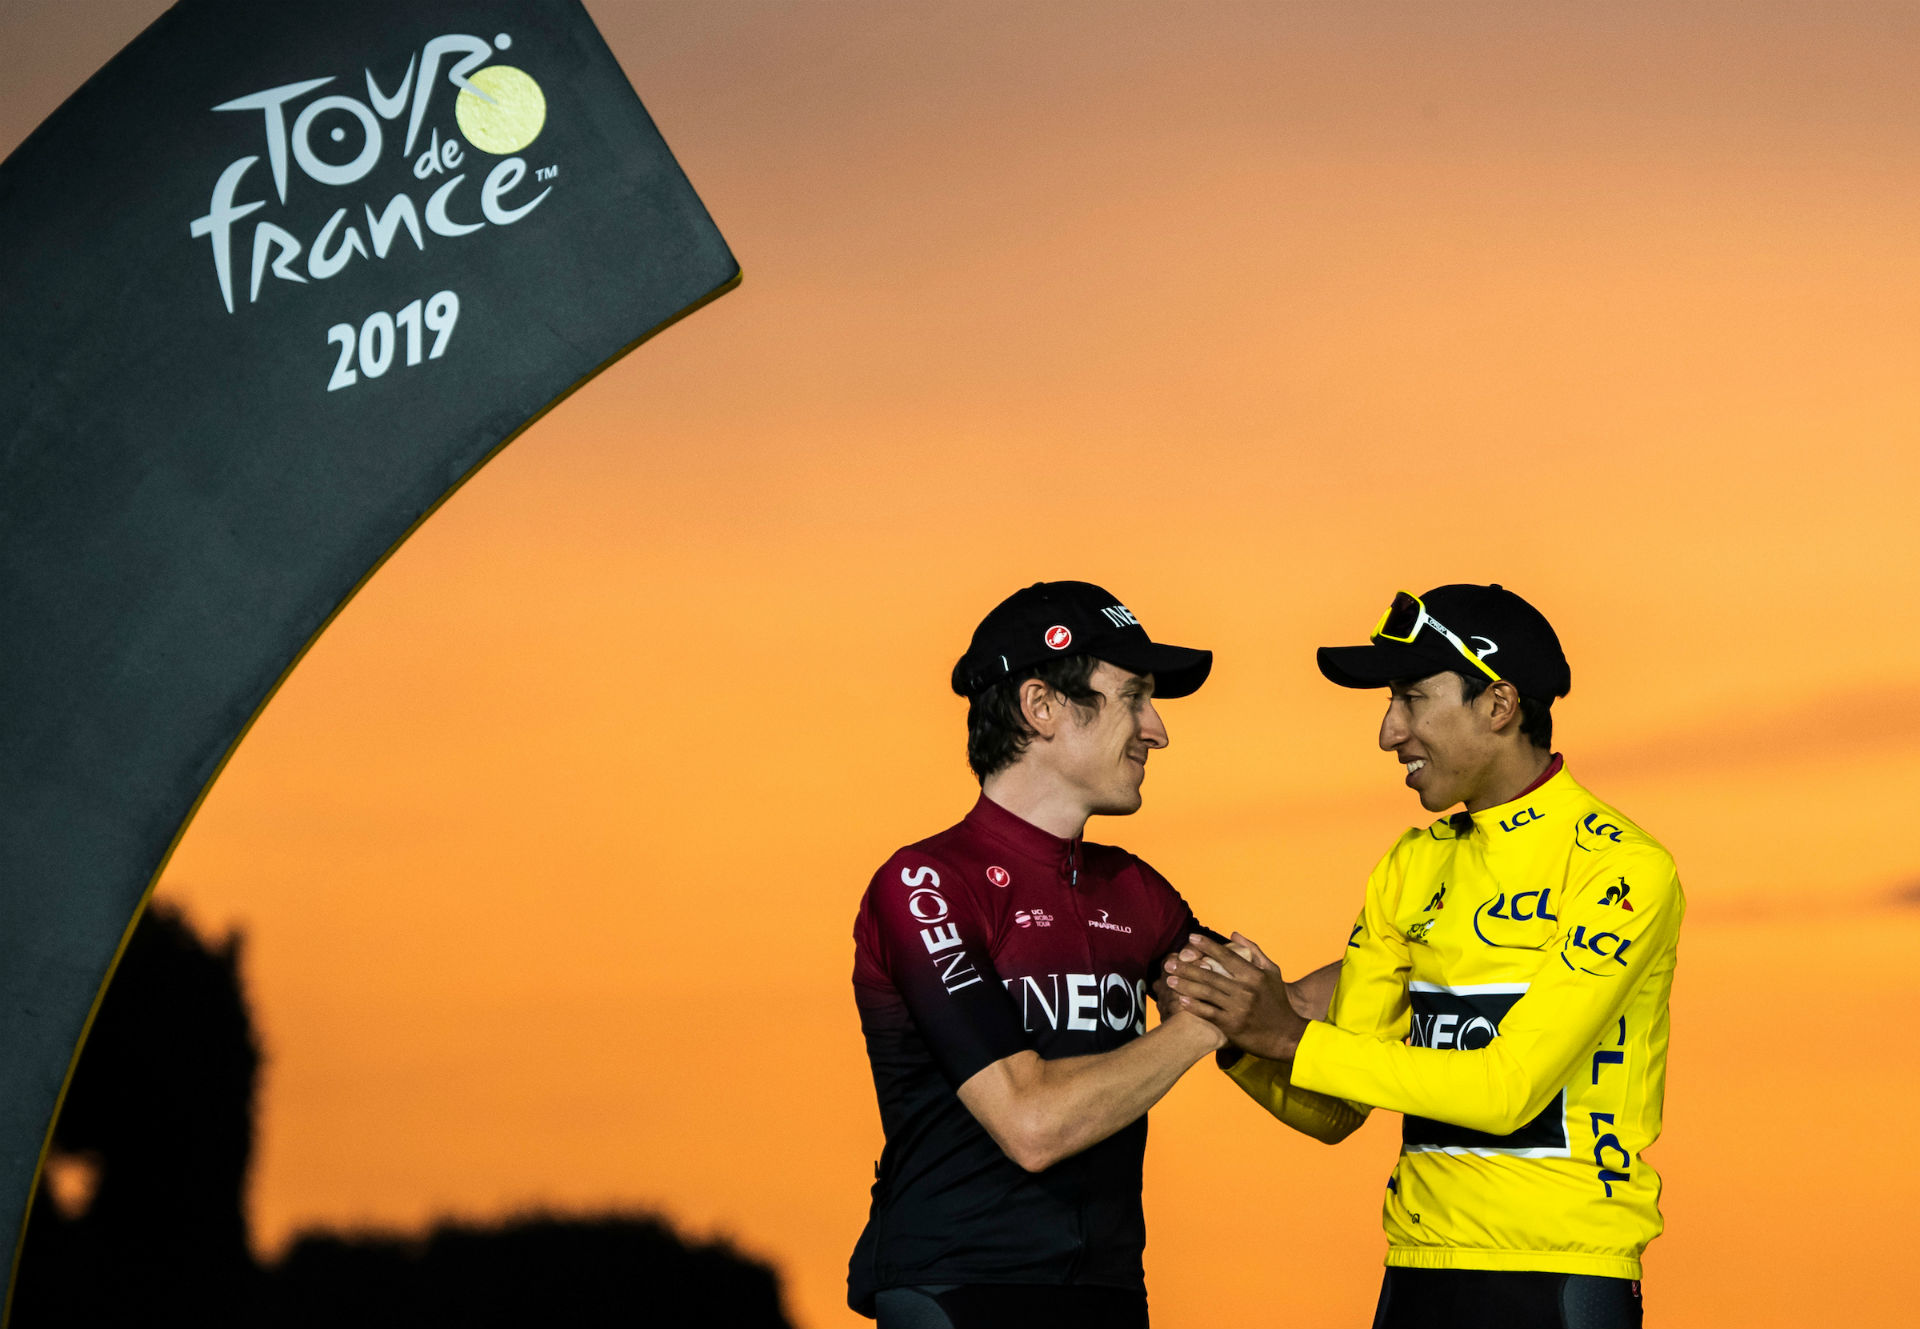 Tour de France 2019 in numbers | Can you guess the fastest recorded speed?